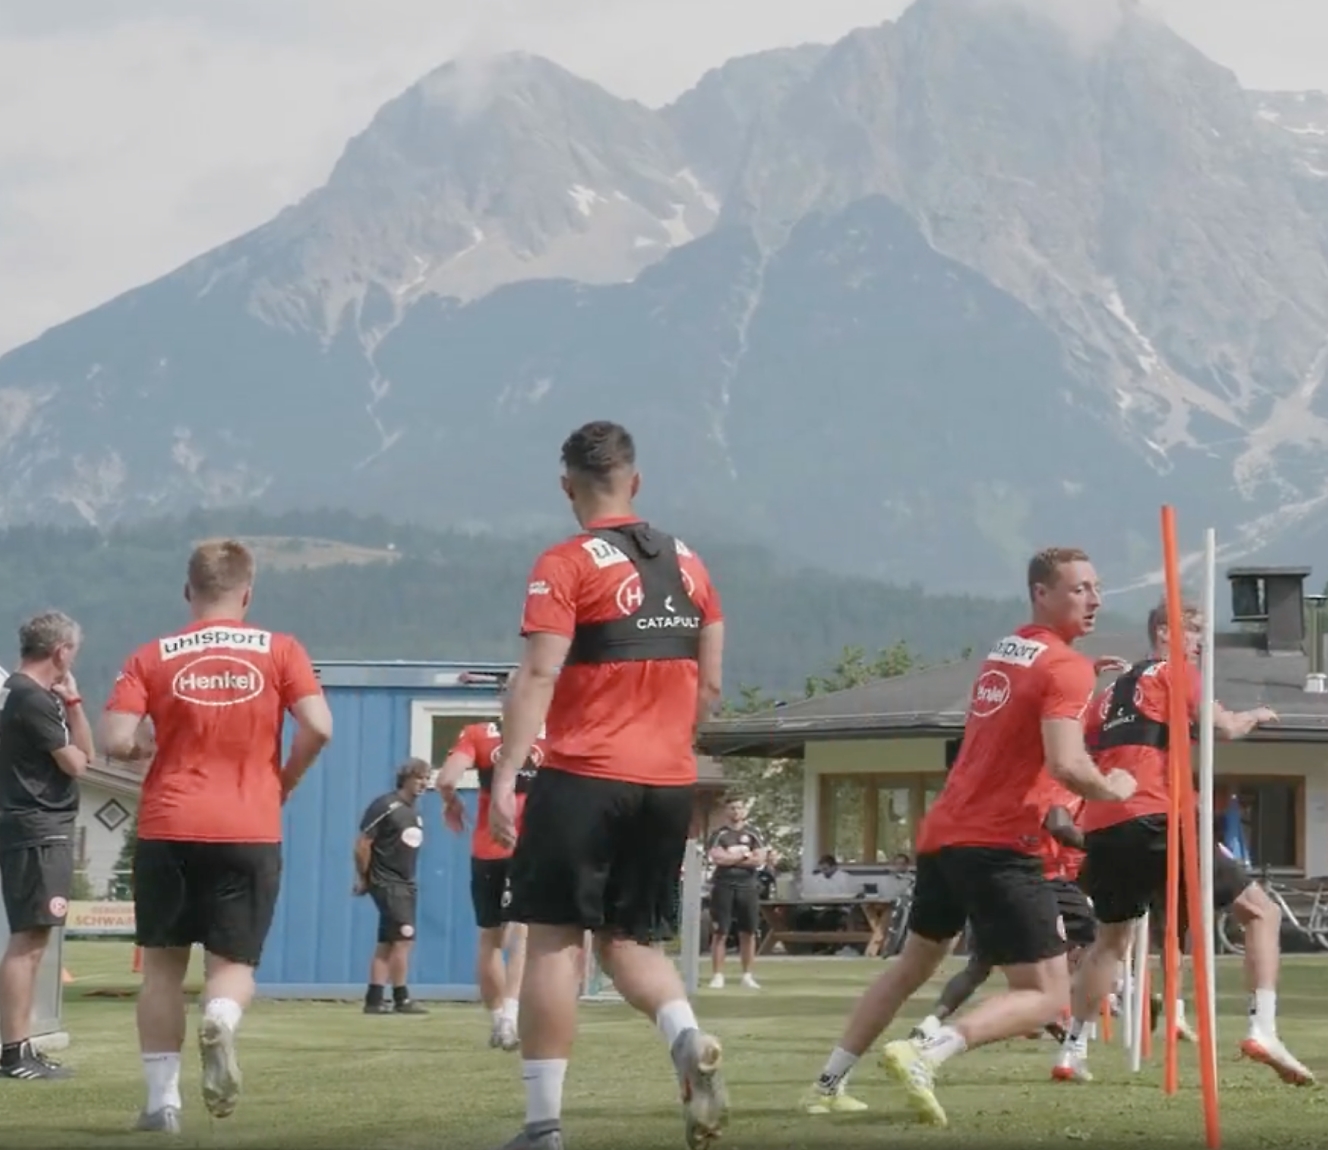 Football players in red jerseys training outdoors with mountain views in the background.